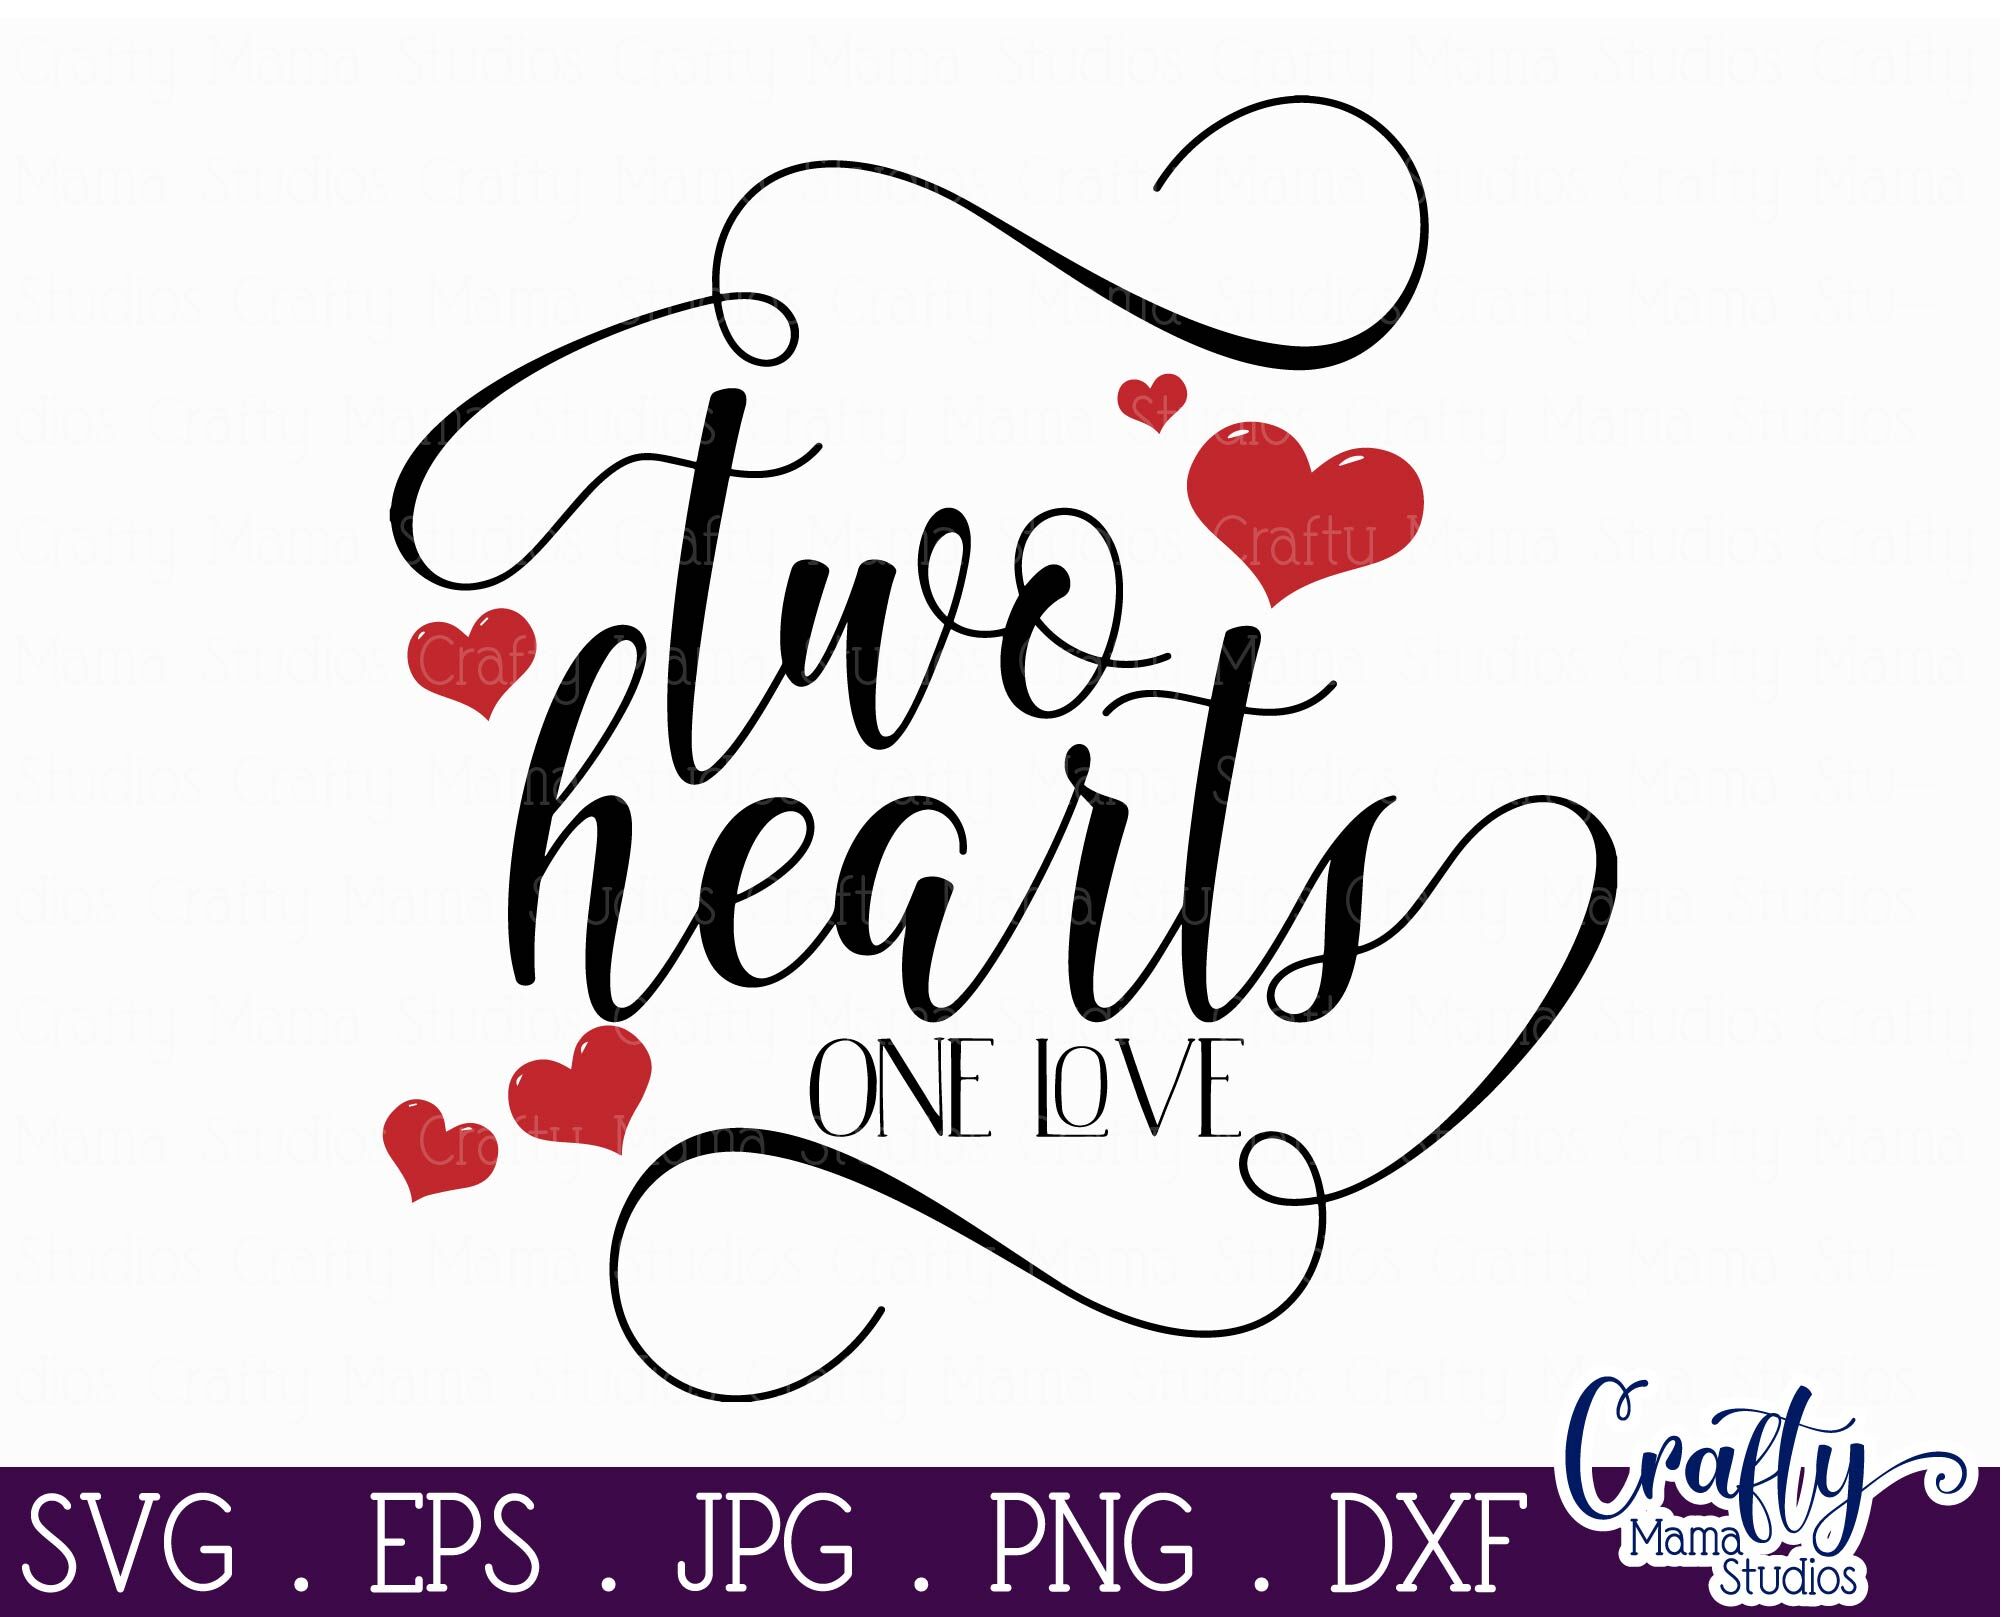 Love Svg Two Hearts One Love Svg By Crafty Mama Studios Thehungryjpeg Com